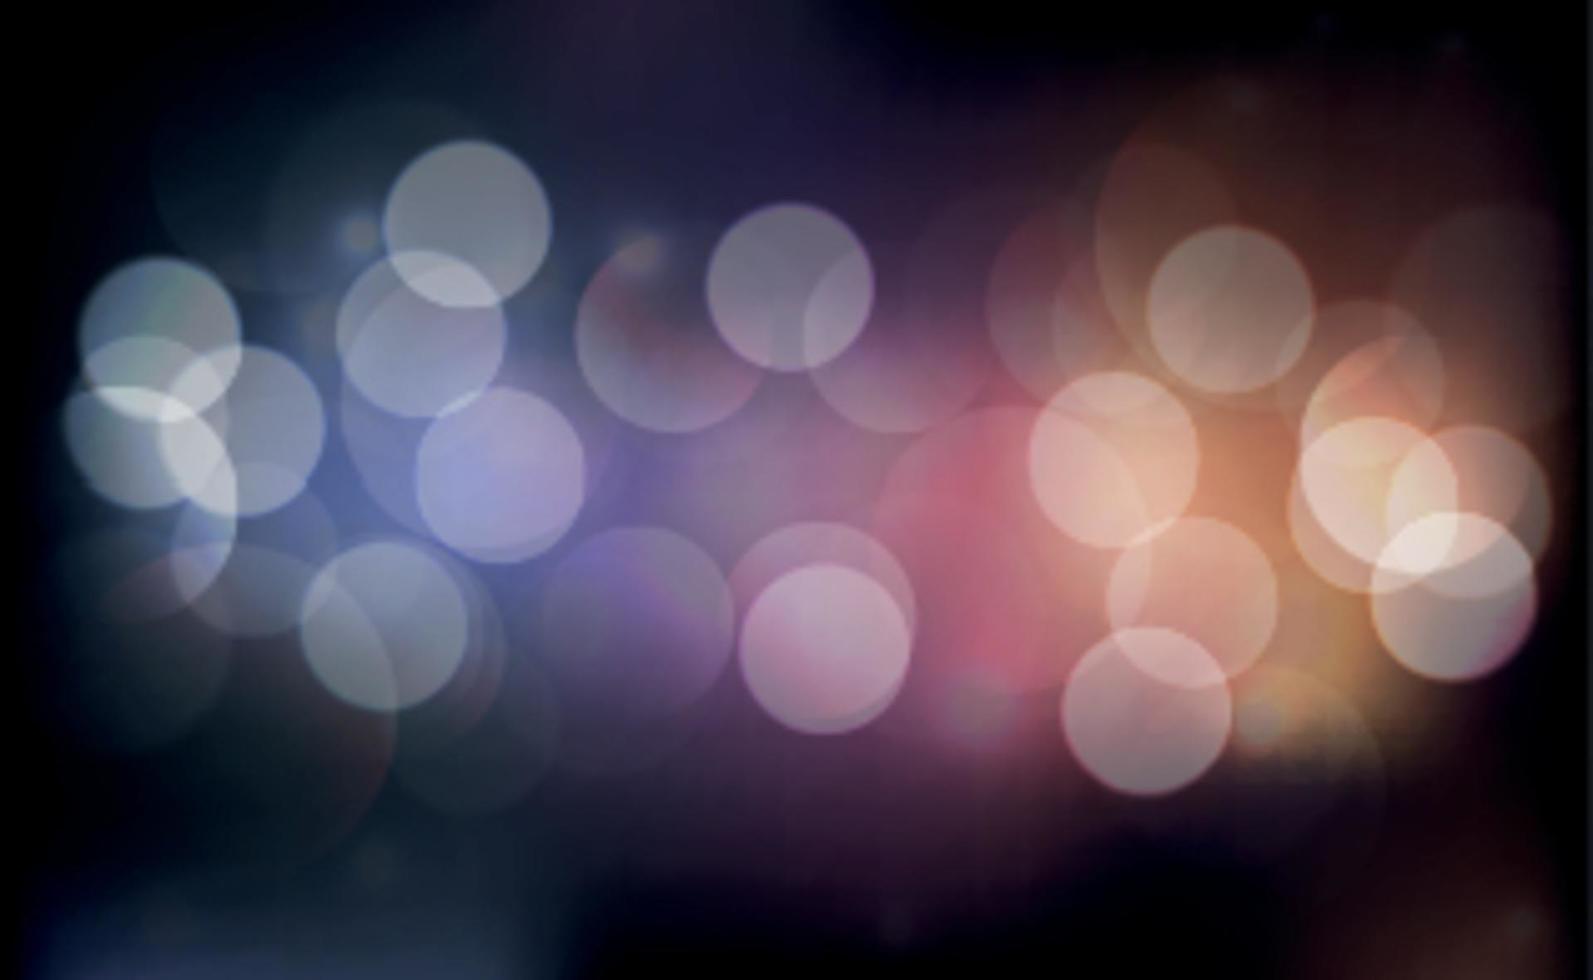 Multicolored blurry bokeh on a dark background vector